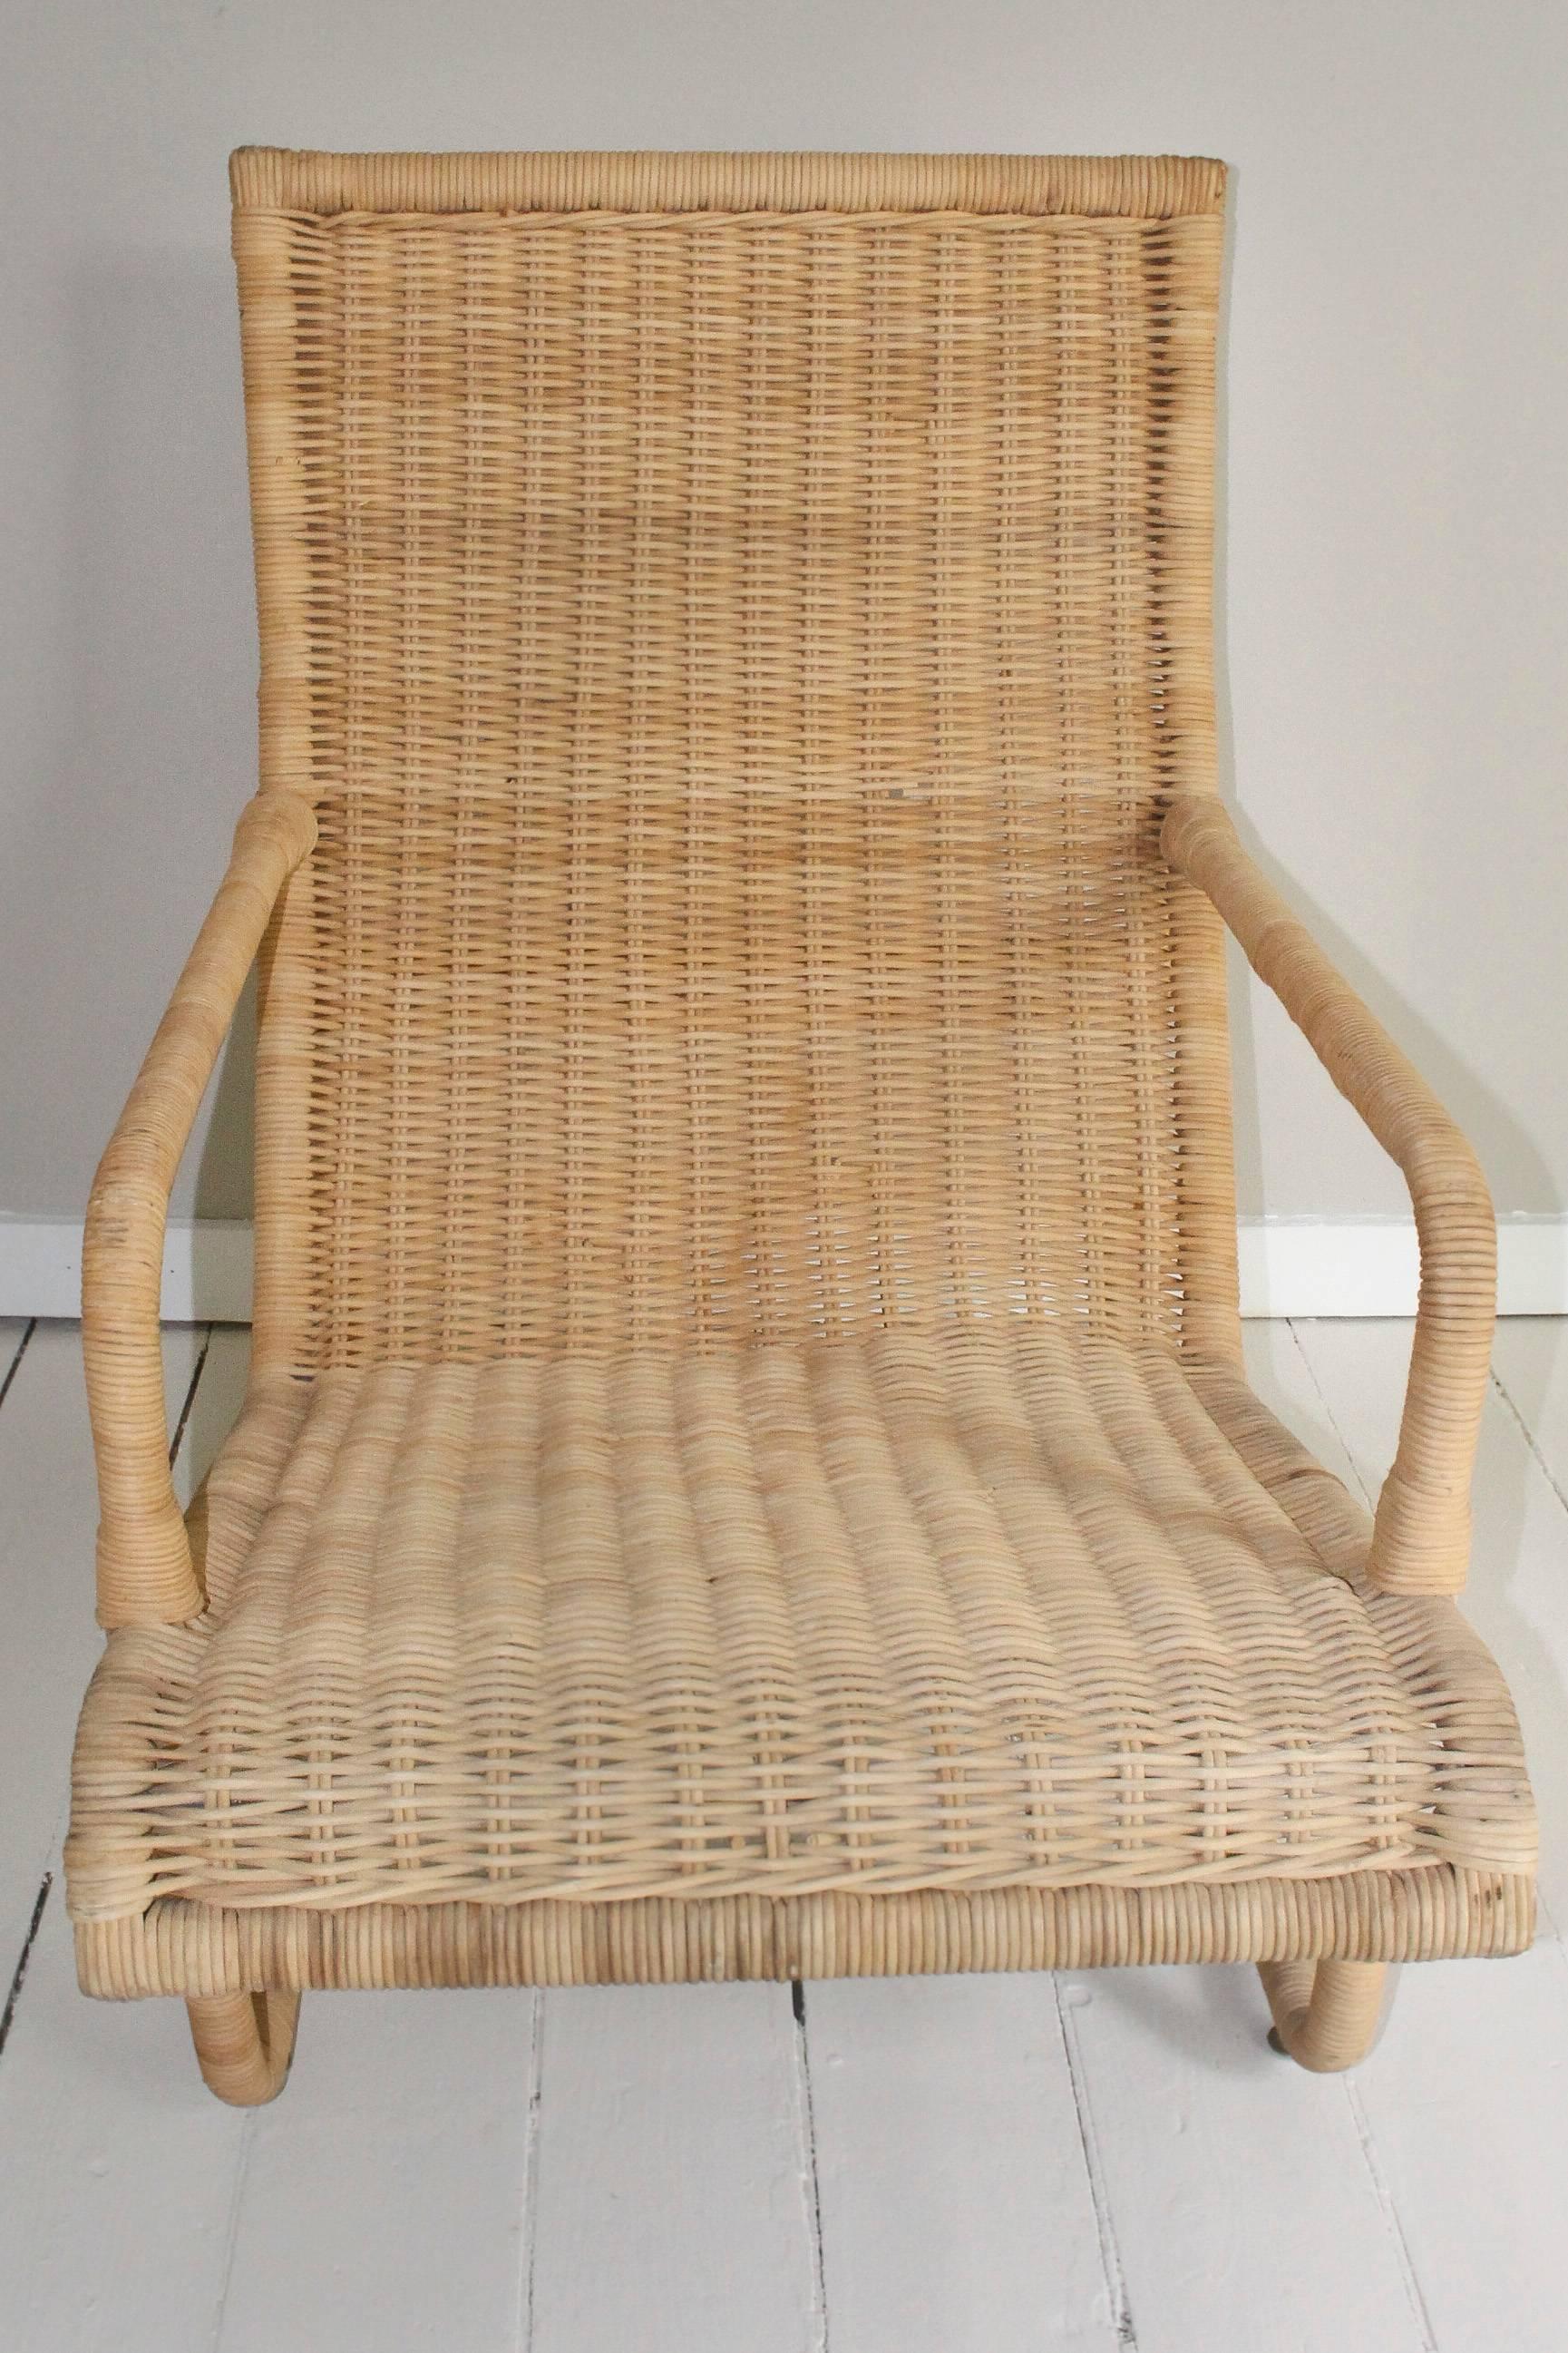 Out-of-production handcrafted Bielecky woven Rattan armchair with sculptural lines.